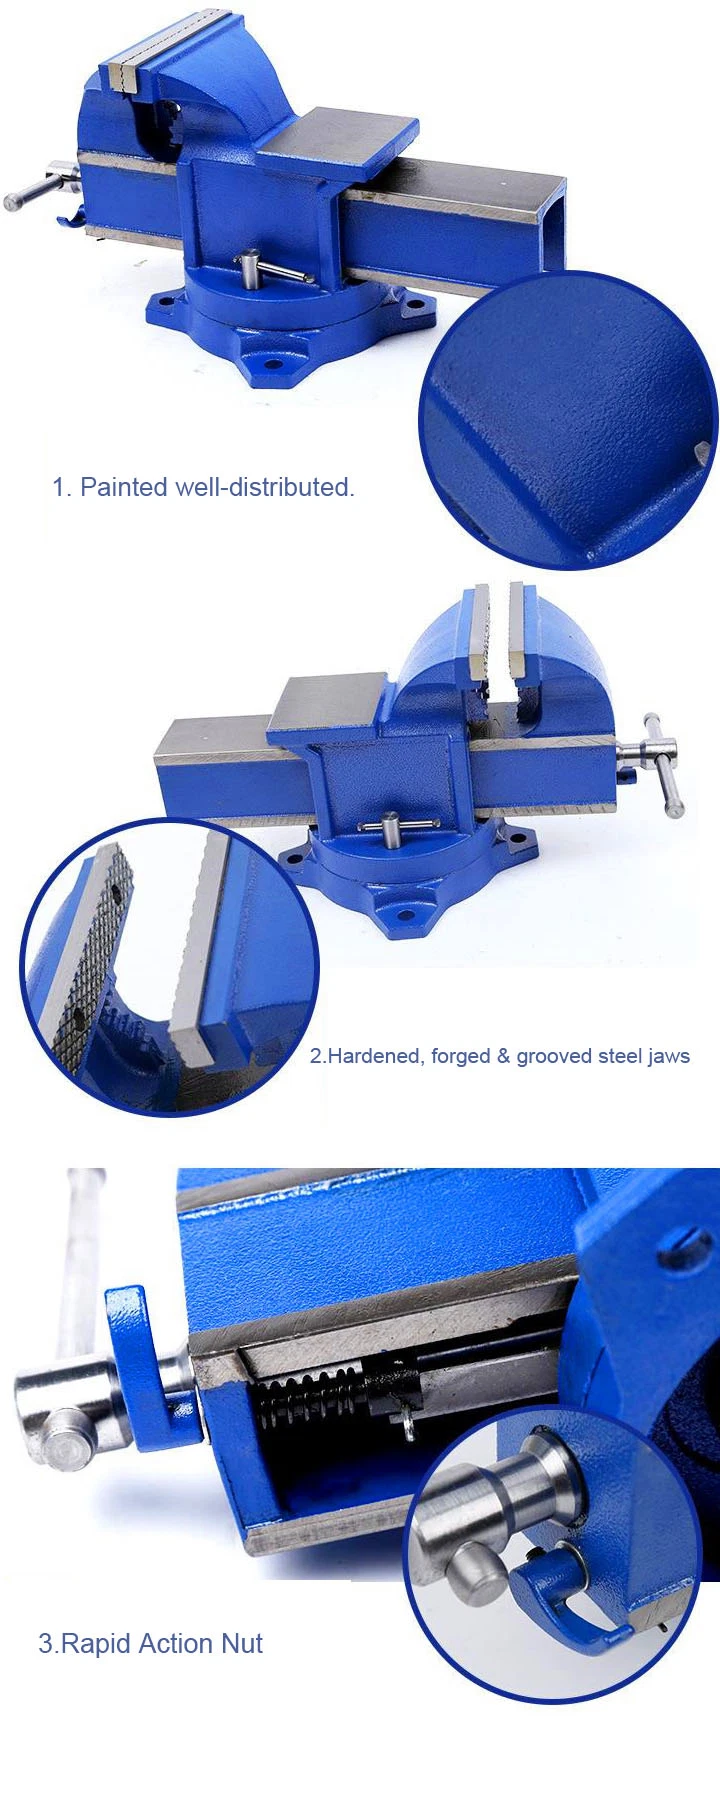 5&prime;&prime;/125mm Quick-Release Bench Vise Swivel Base with Anvil